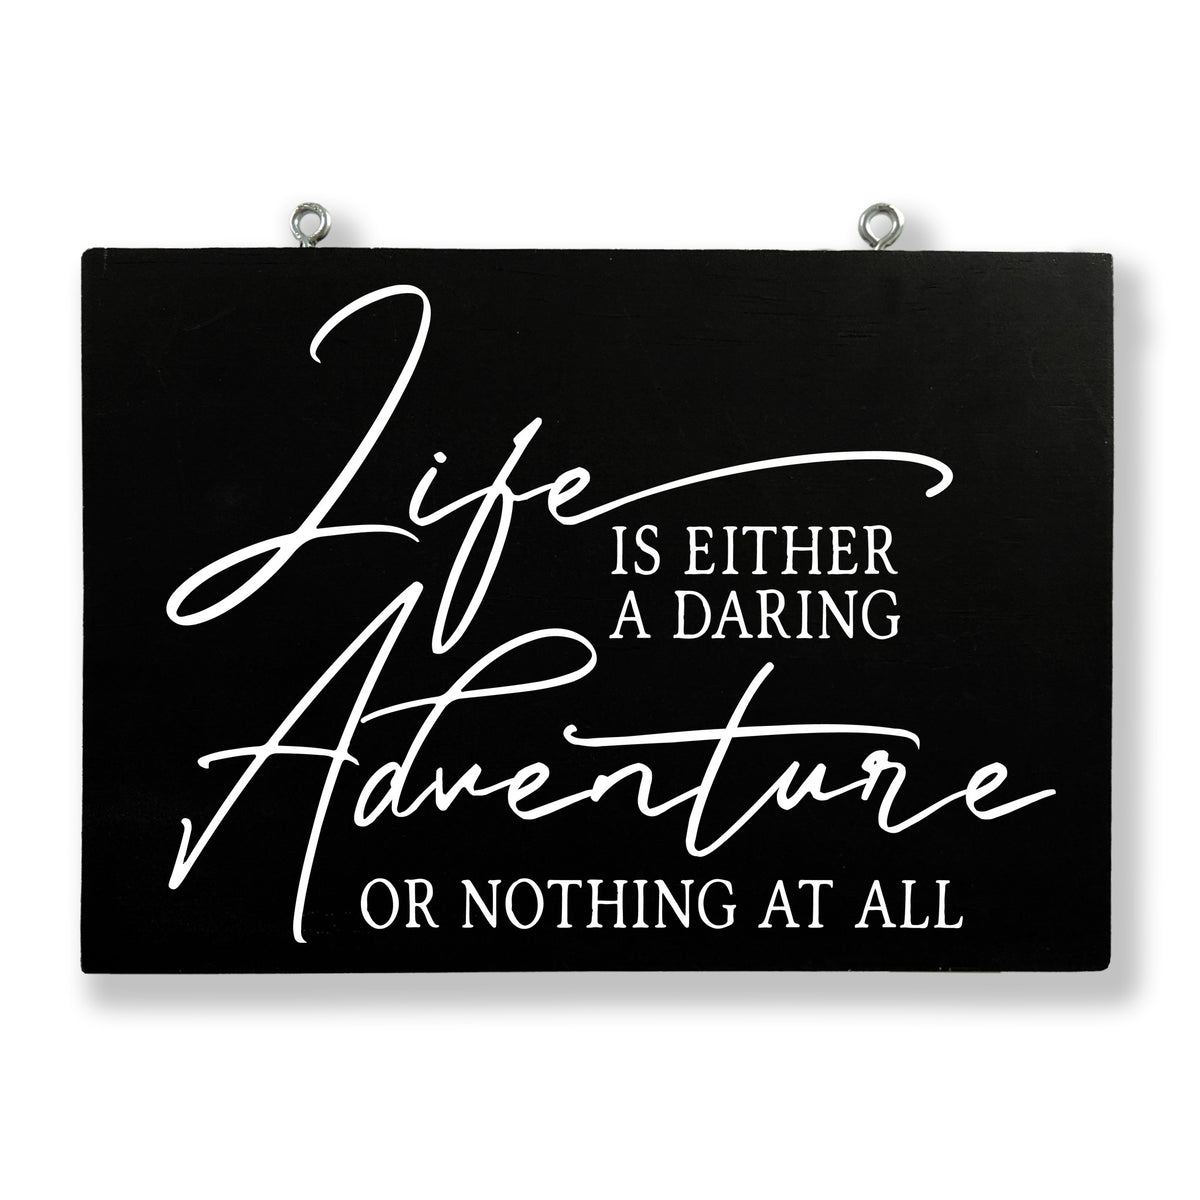 Life Is Either a Daring Adventure Or Nothing At All